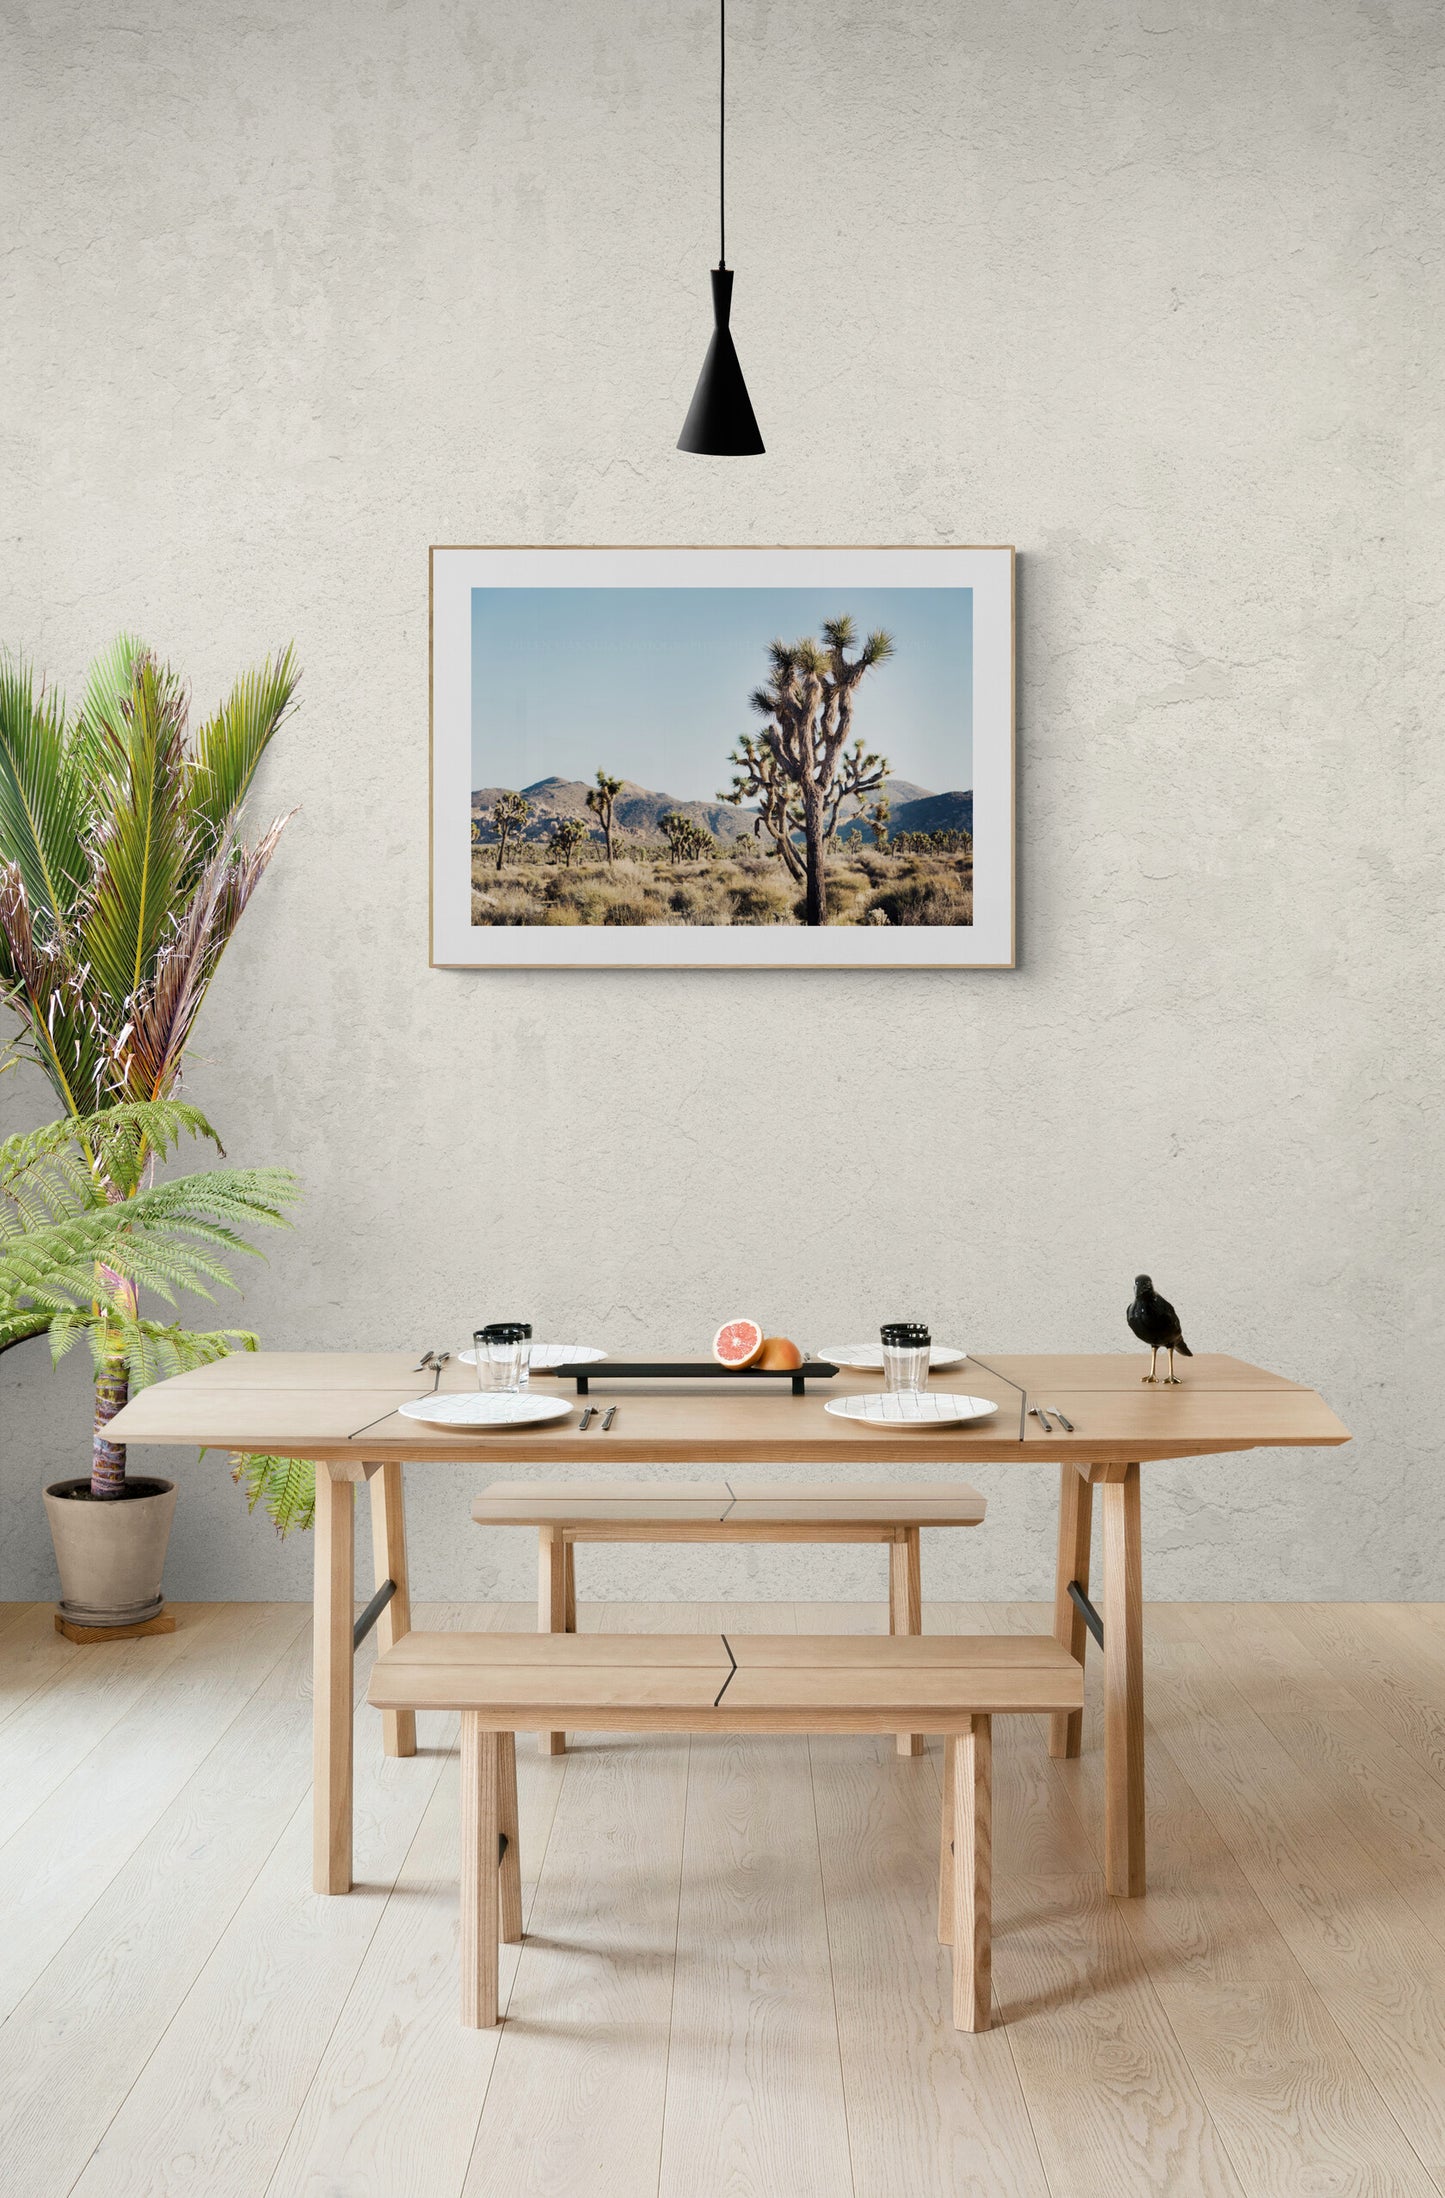 Joshua Tree National Park Photograph Print in a kitchen nook as wall art